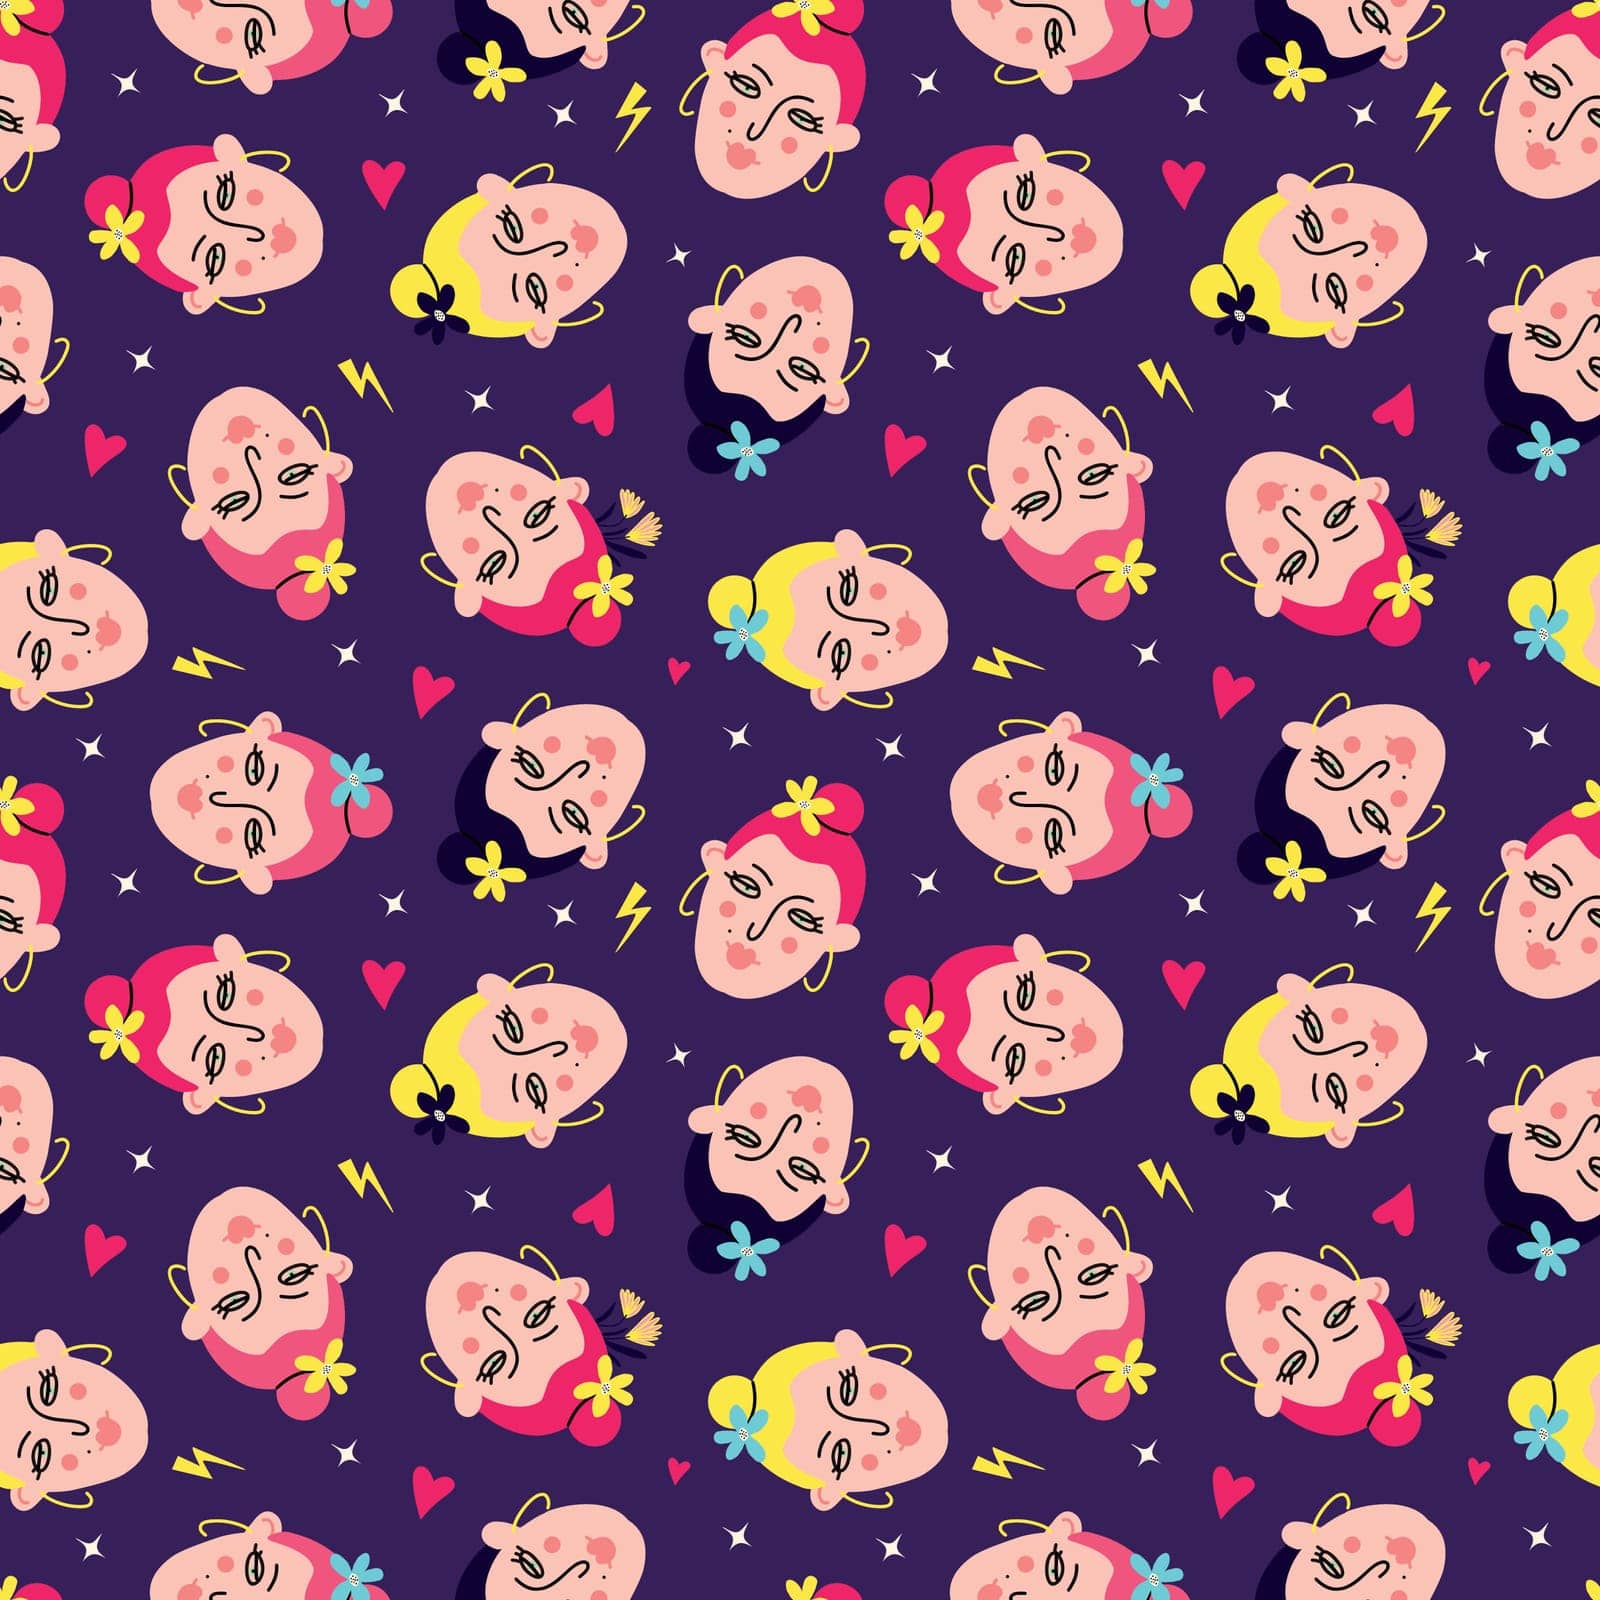 Bright pattern with comical funny girly faces, hearts and stars on a purple background